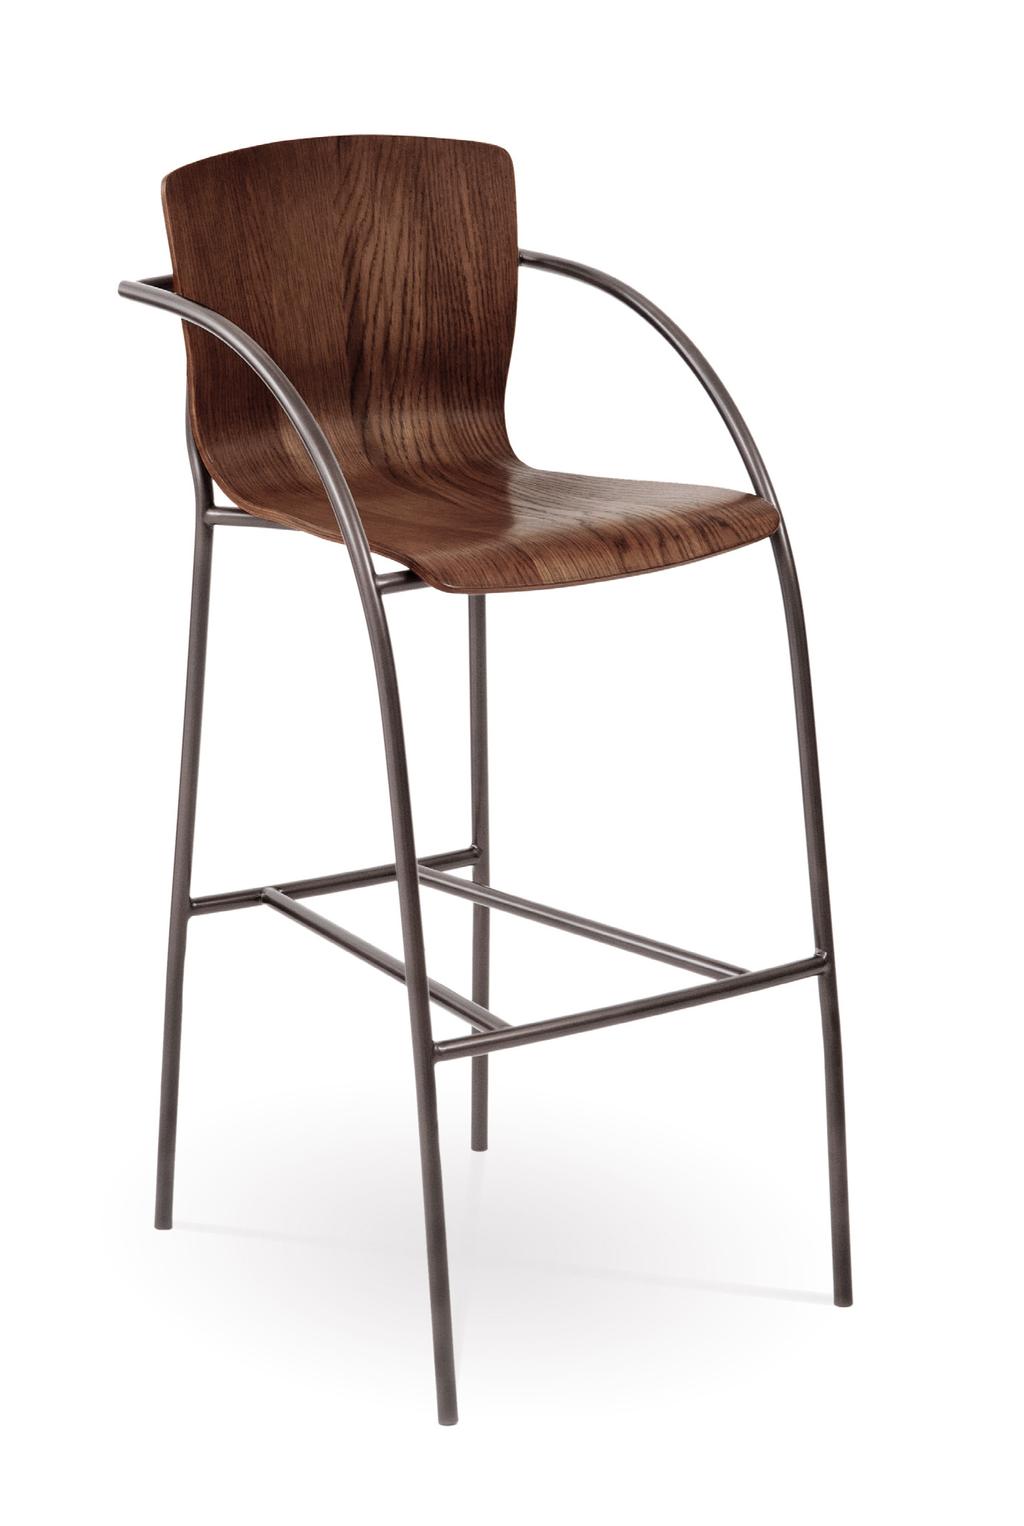 C954 Merritt Barstool with Arms Shown in Gunmetal (79) with a Cinder on Oak seat with Natural Distressing (C-O-ND).